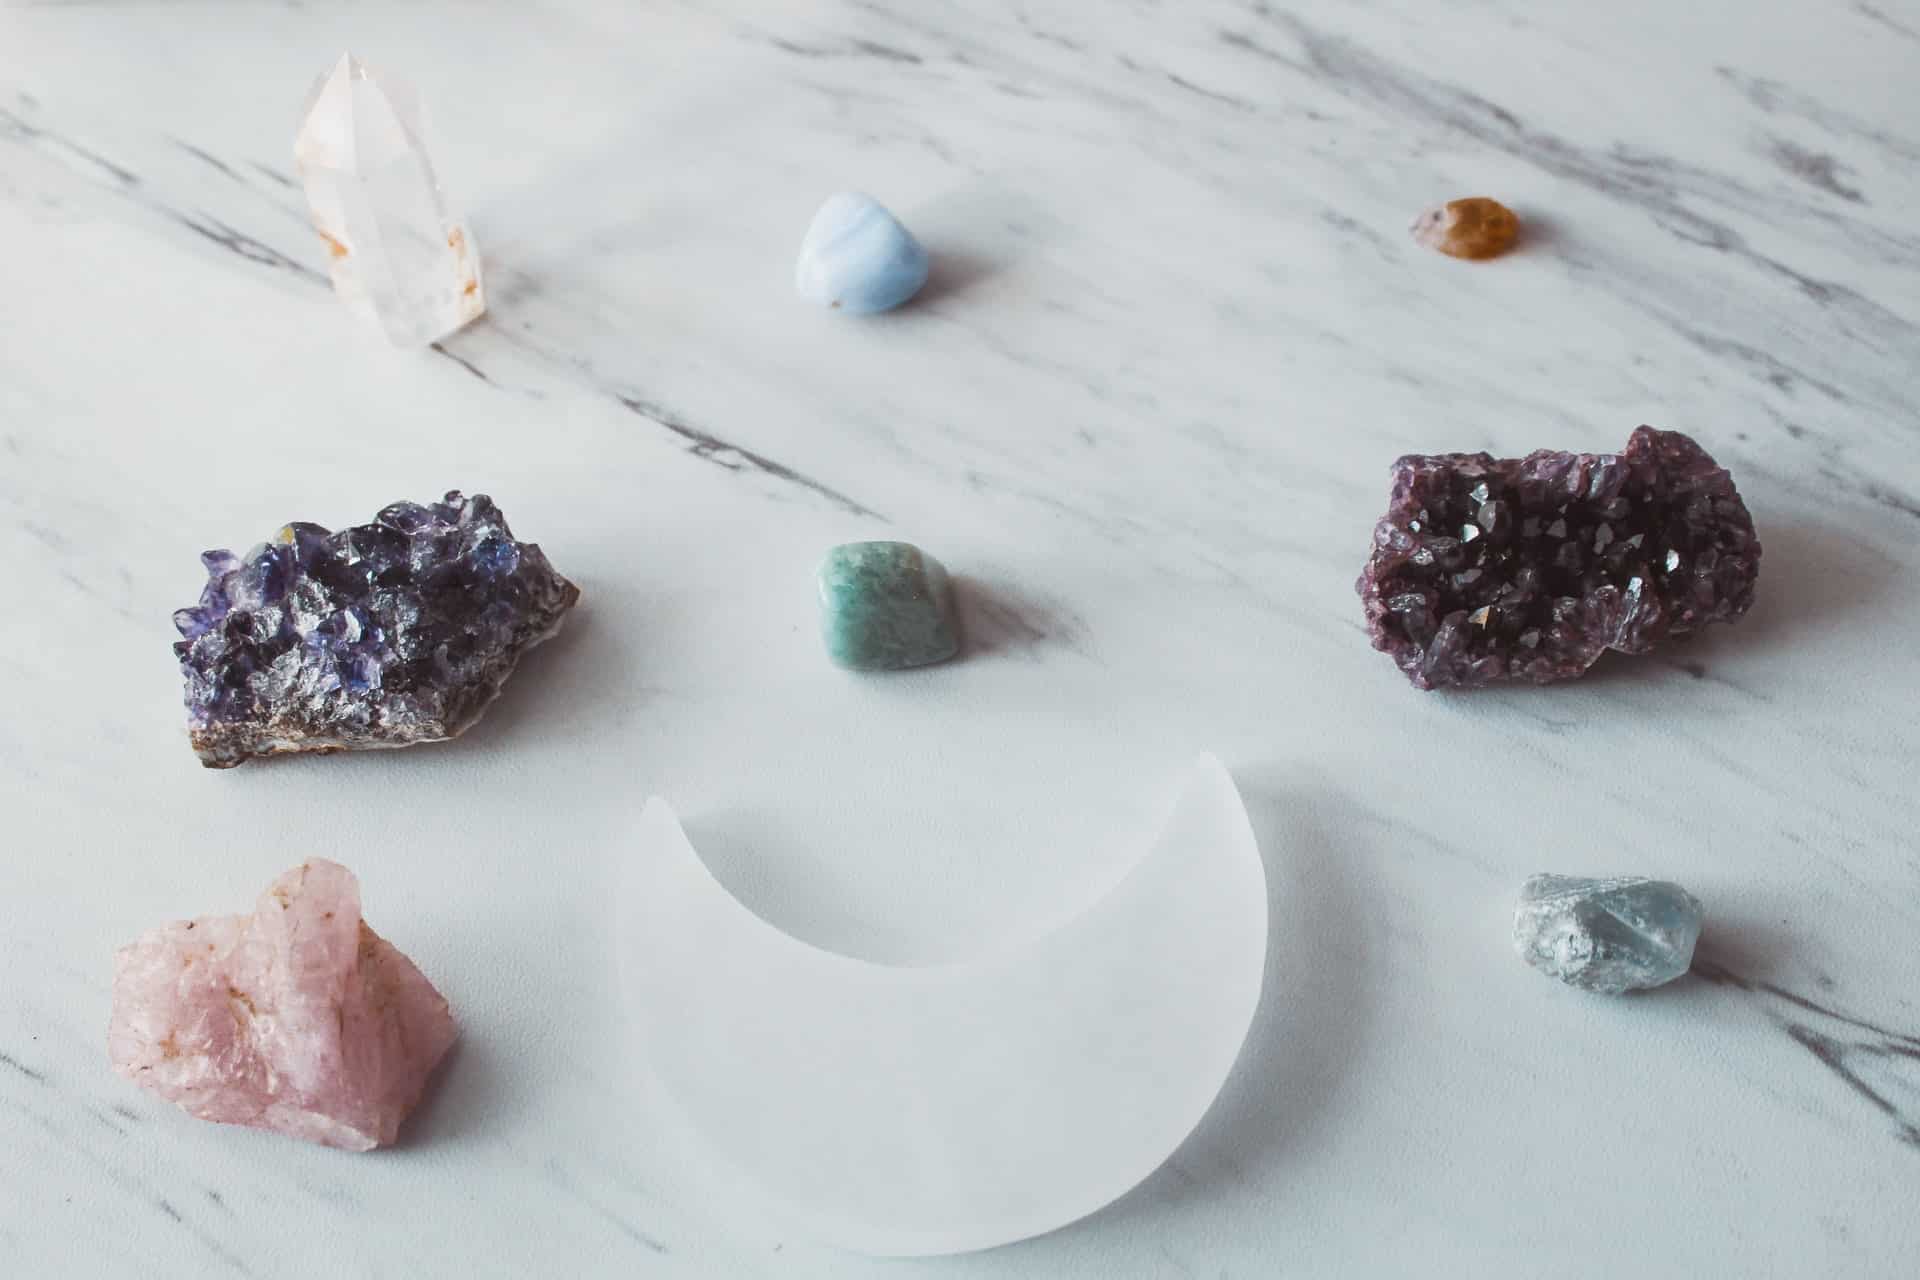 How To Manifest With Crystals In 4 Easy Steps